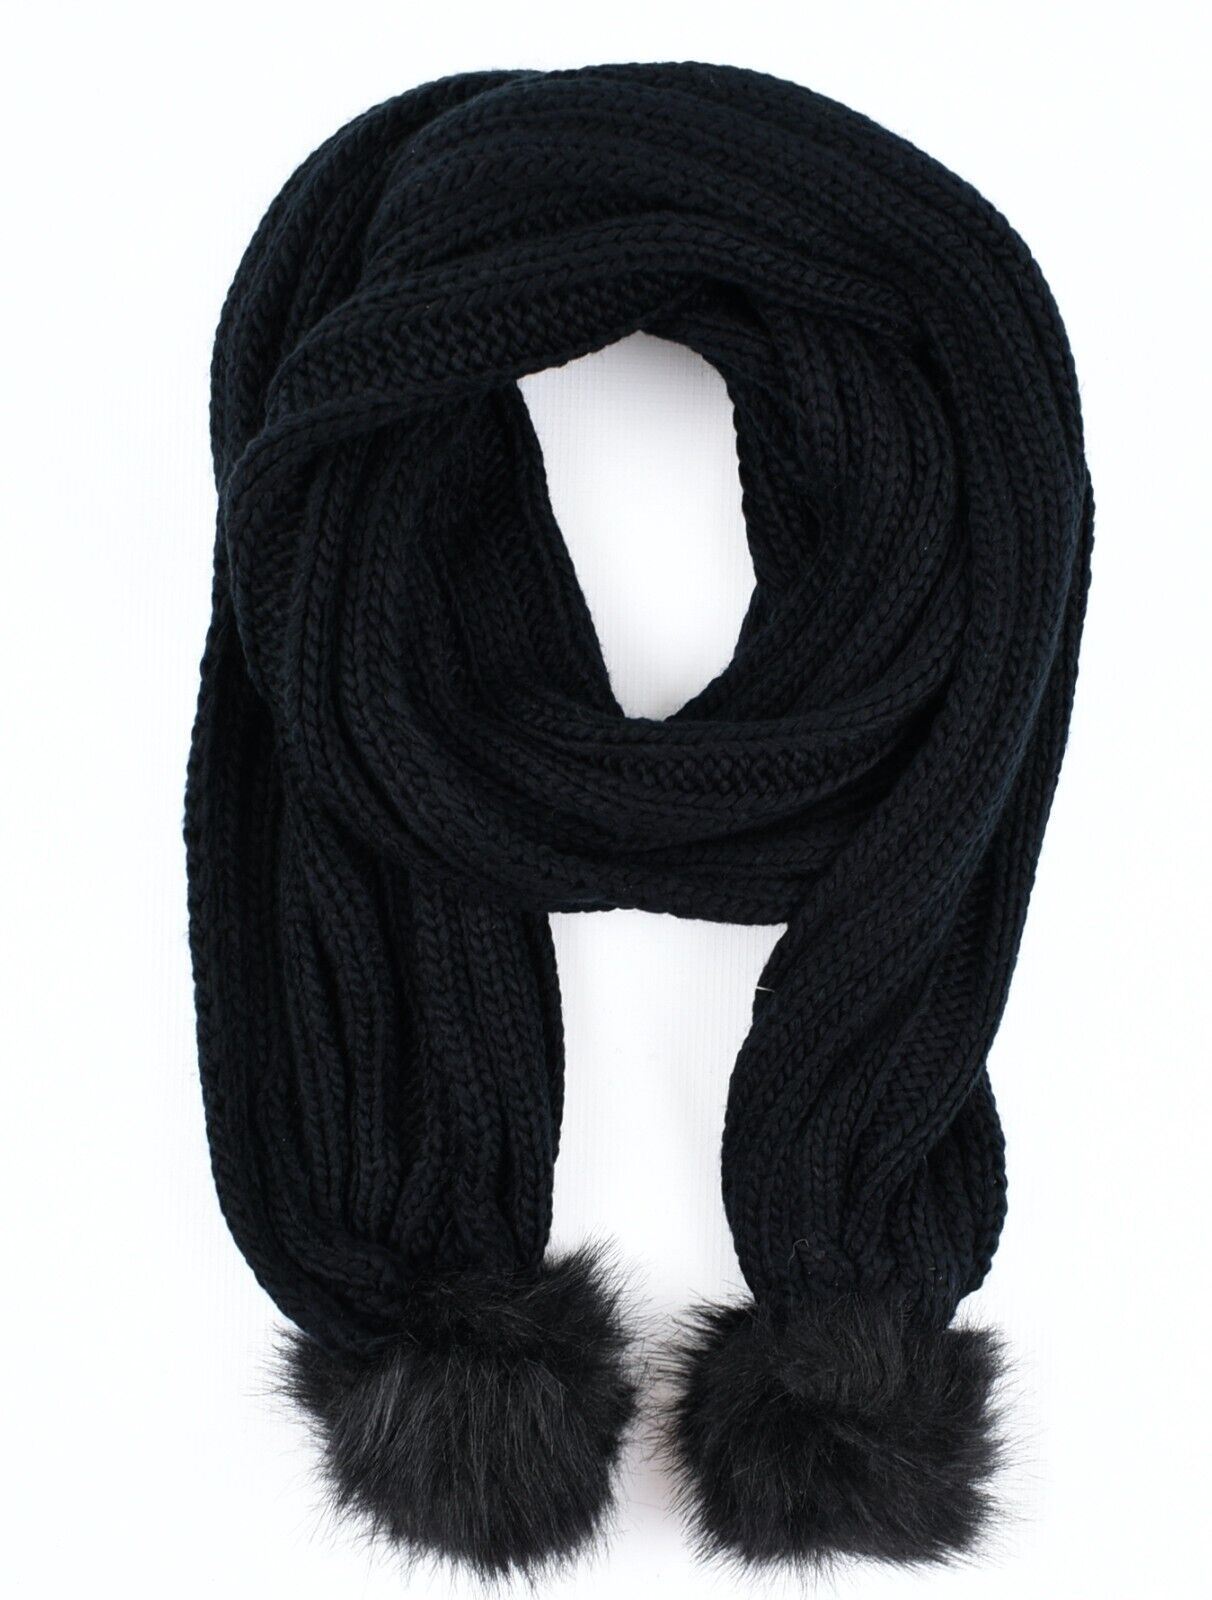 FIRETRAP Women's Cable Knit Winter Scarf with Fluffy Pom Poms, Black